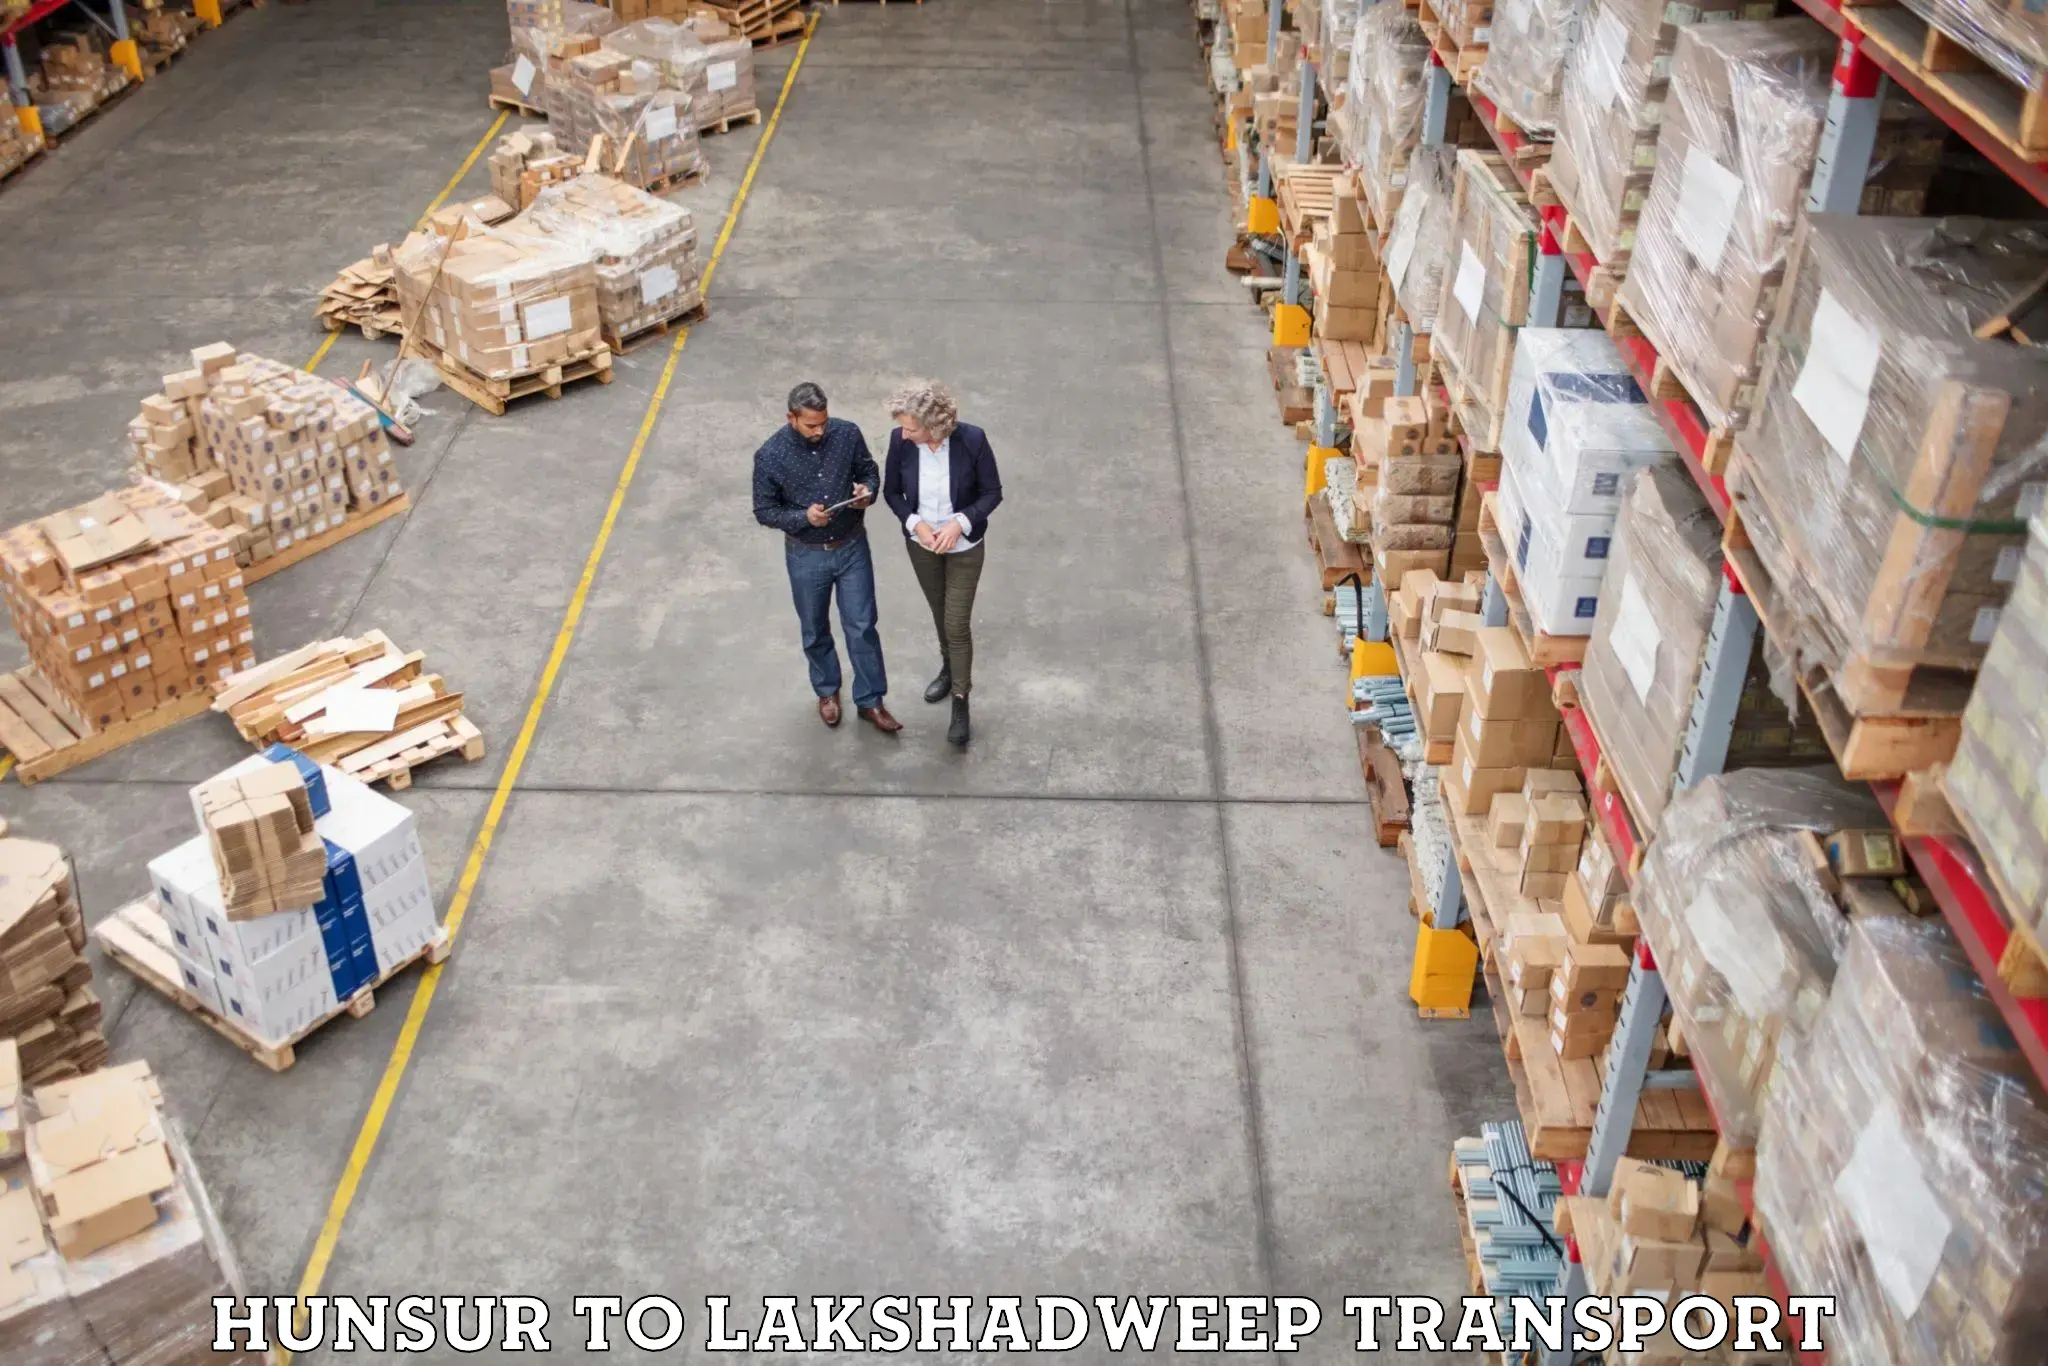 Container transport service Hunsur to Lakshadweep